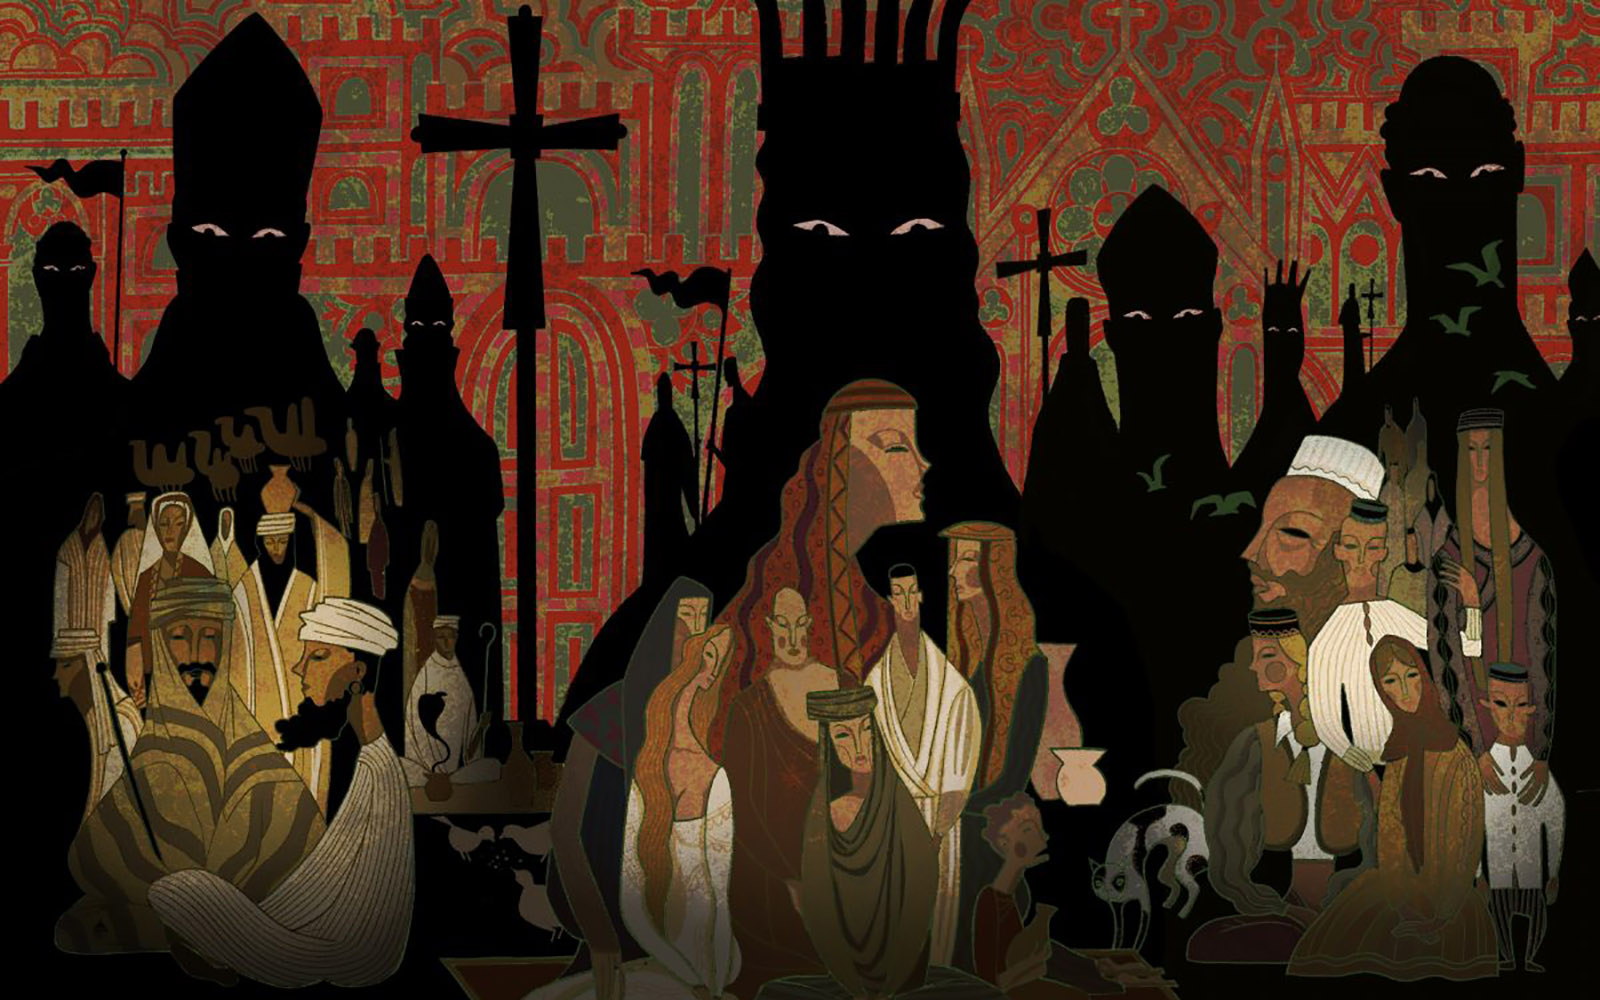 An illustration depicting shadowy King figures overlooking various people standing and kneeling in old robes.